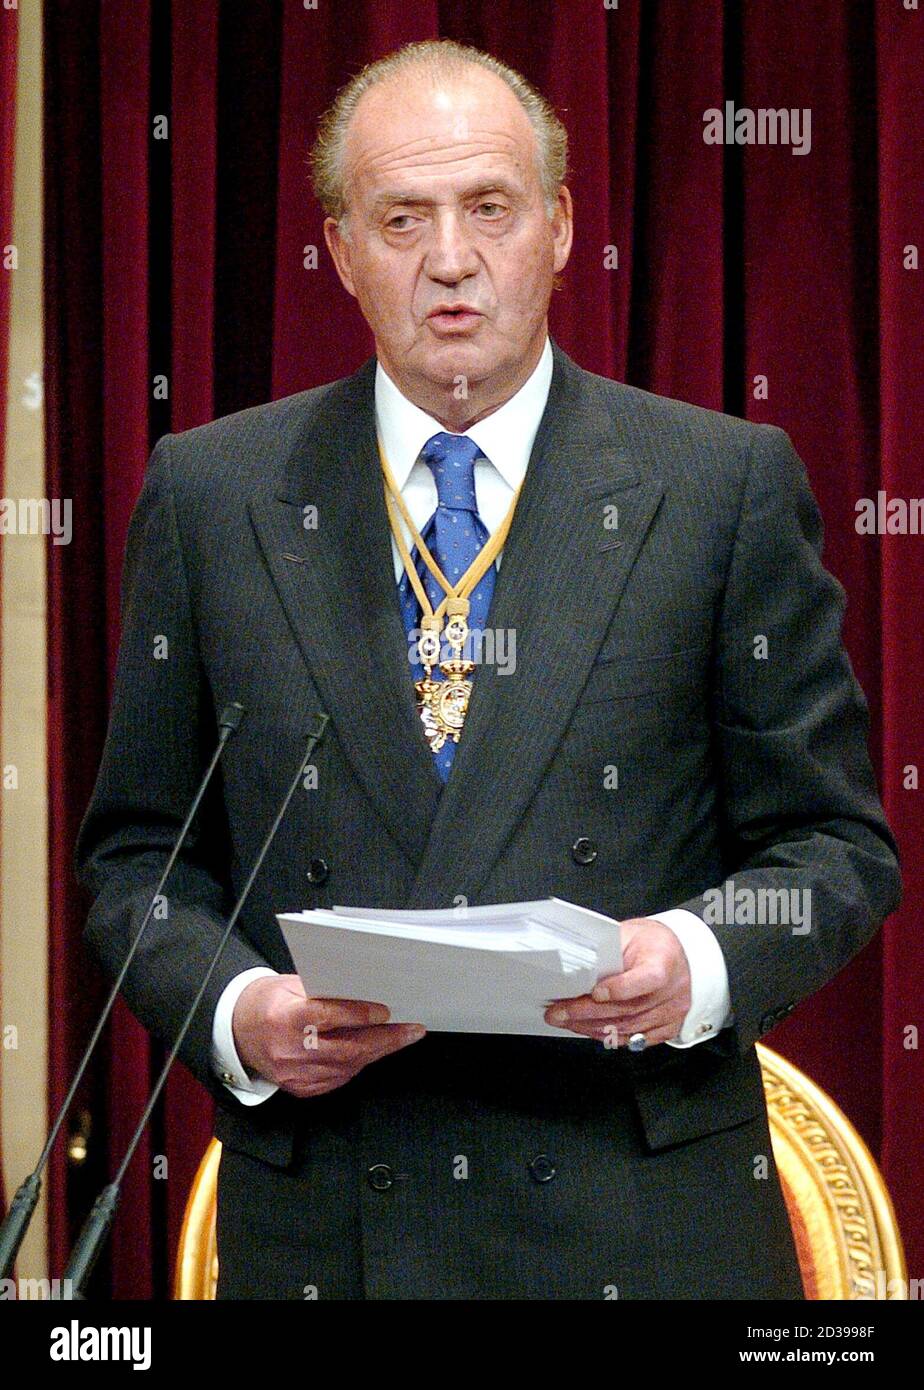 spanish-king-juan-carlos-delivers-his-speech-during-a-cerenomy-at-parliament-in-madrid-april-22-2004-king-juan-carlos-presided-over-the-traditional-opening-ceremony-of-the-viii-legislature-in-parliament-reuterspool-spgb-2D3998F.jpg